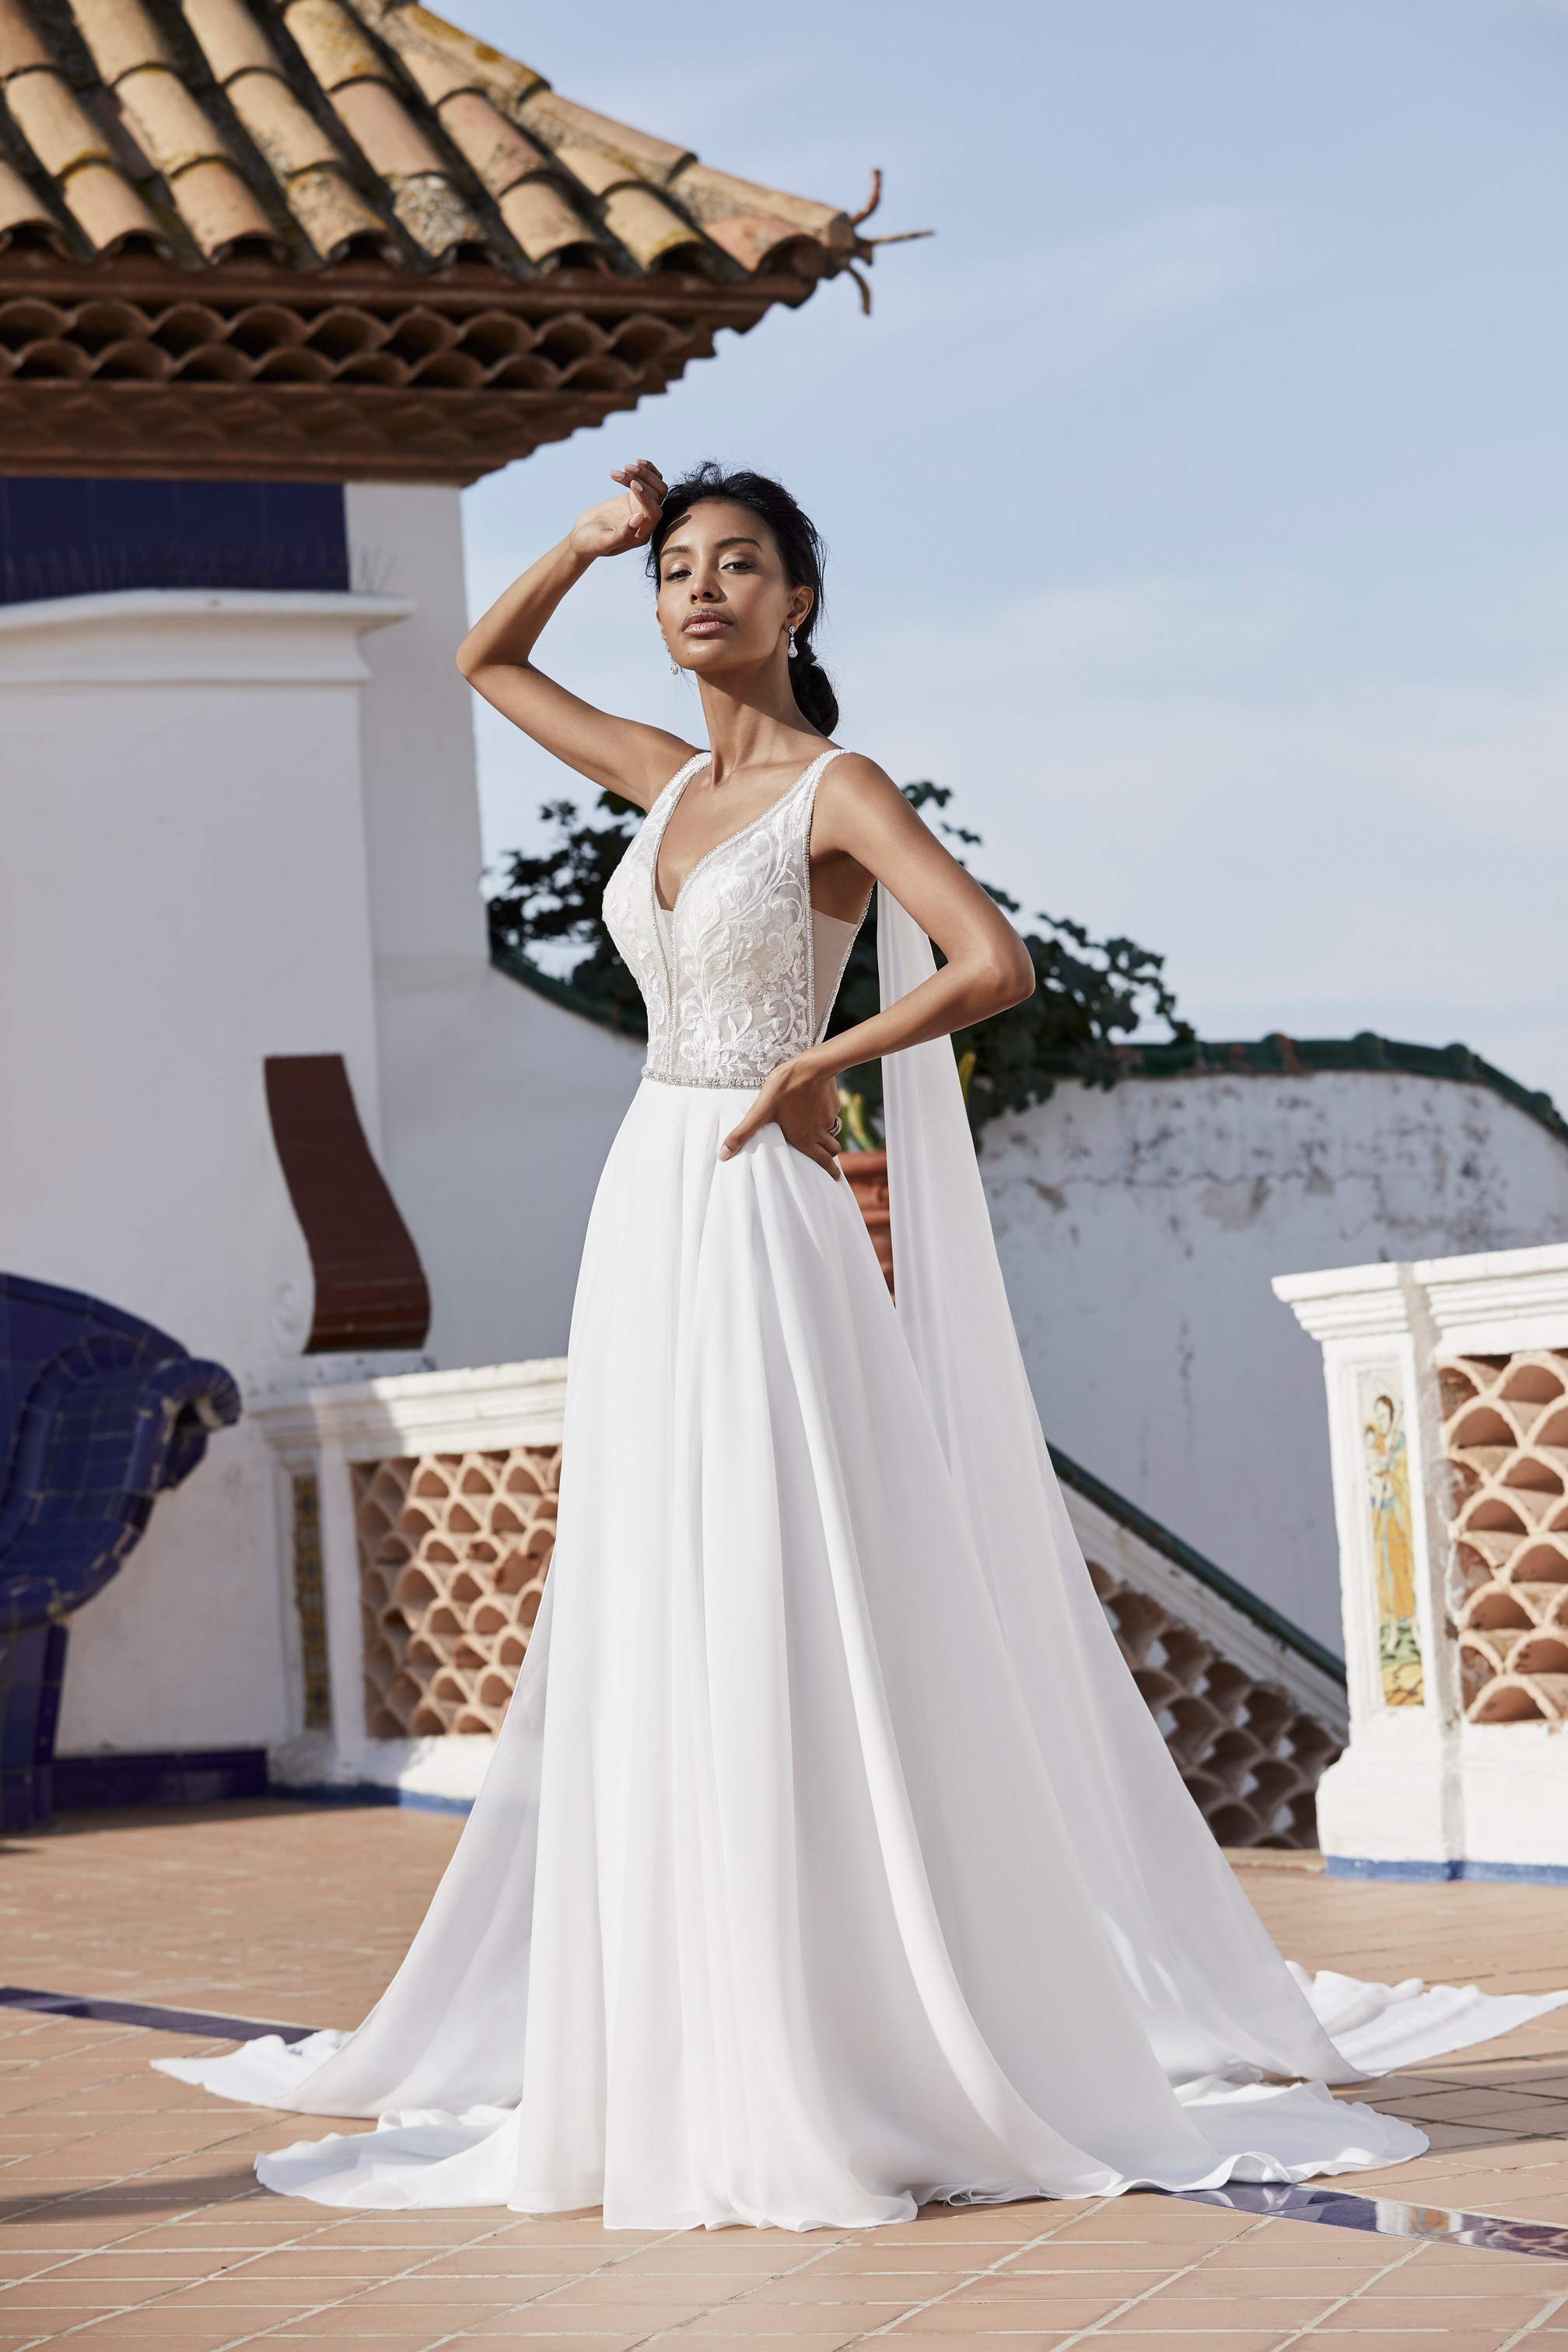 Model stood on a Spanish terrace in Victoria Jane 18555, an A-line destination wedding gown with a plunging neckline, lace body, plain floaty skirt and shoulder capes